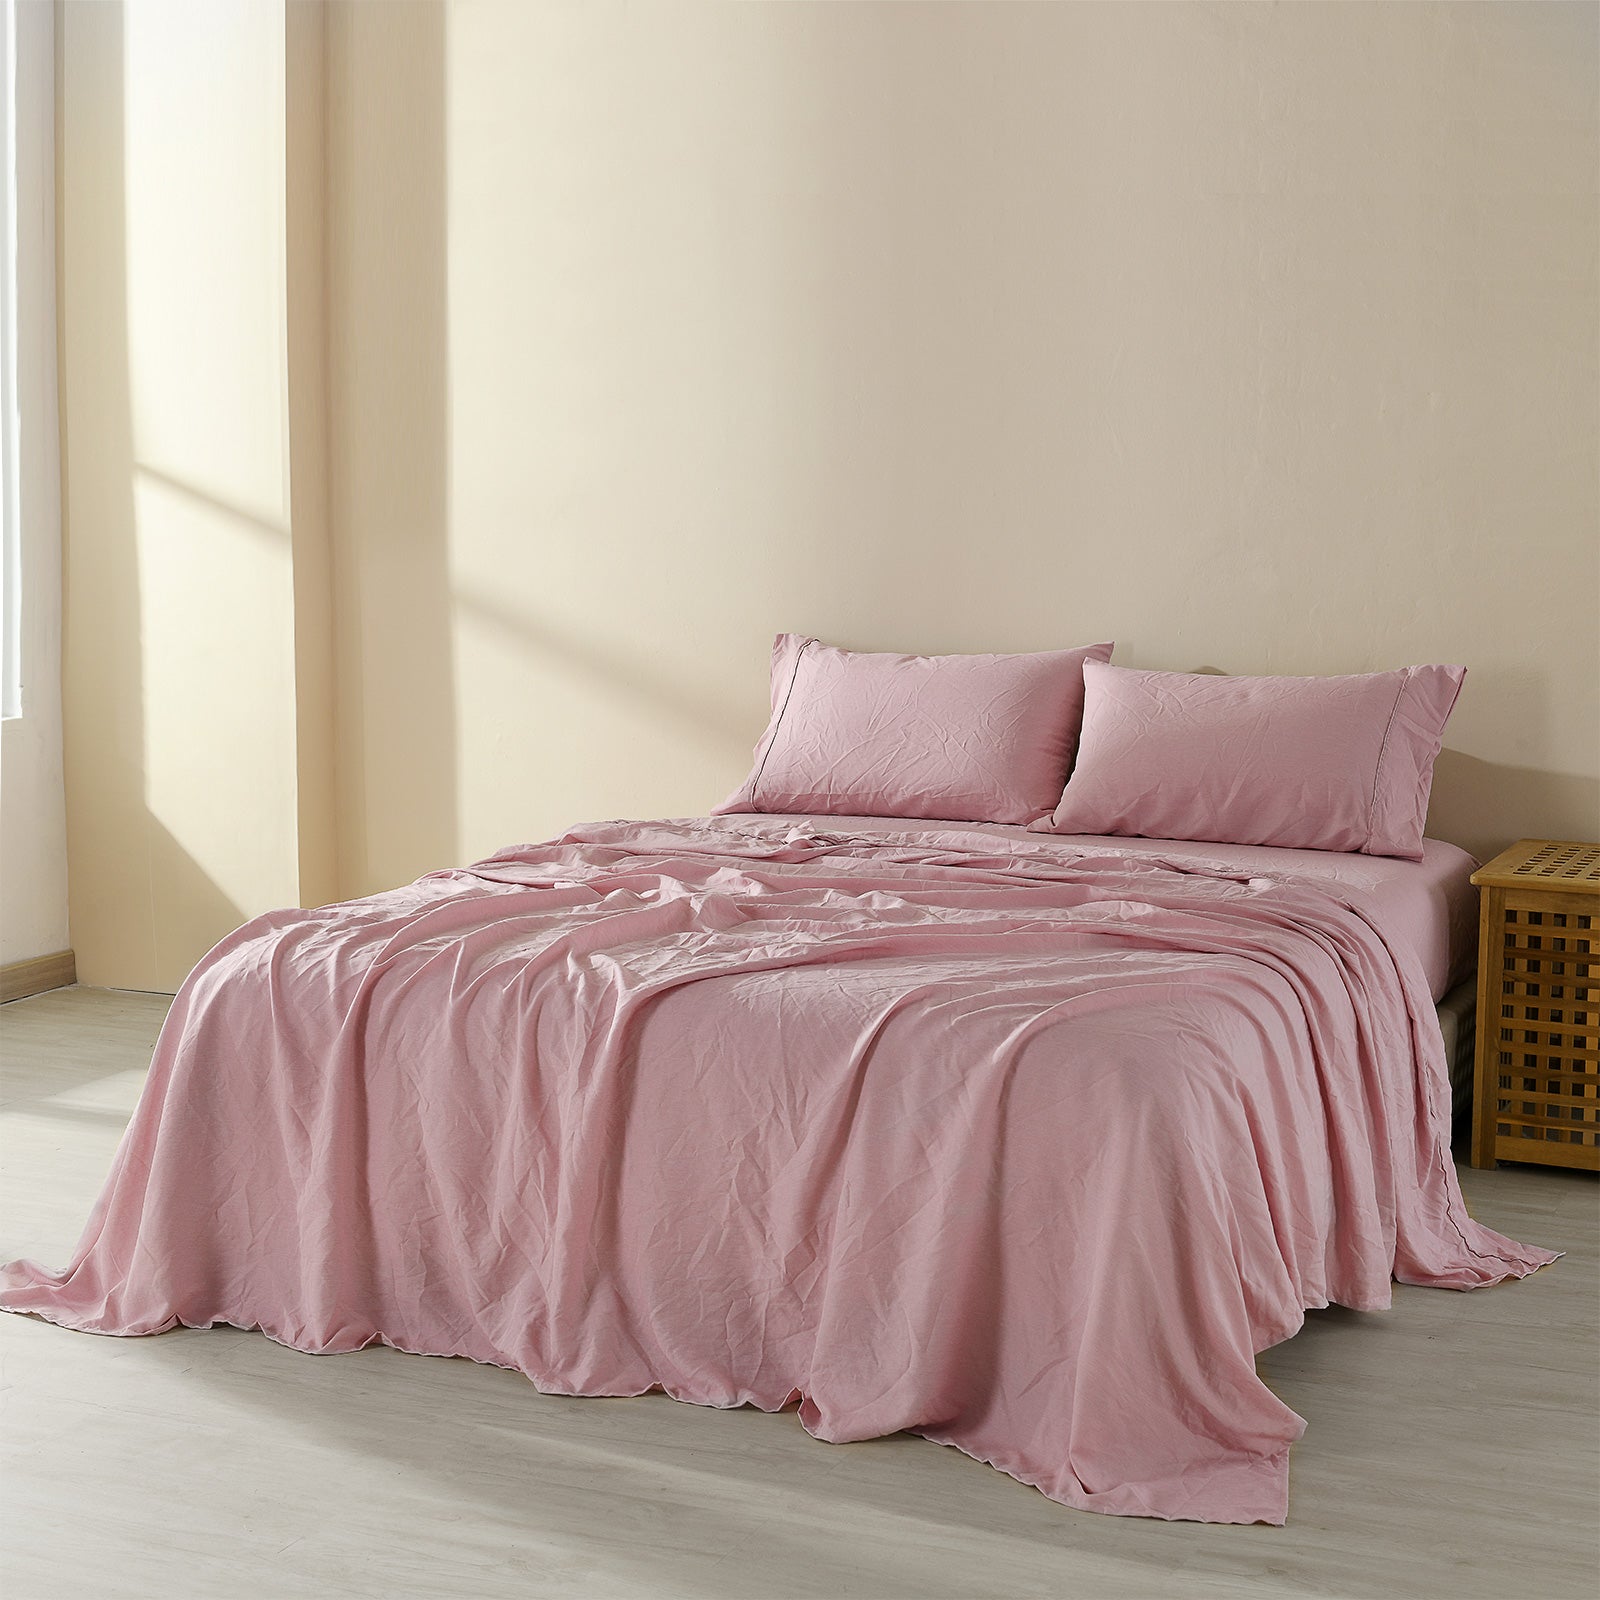 Royal Comfort Flax Linen Blend Sheet Set Bedding Luxury Breathable Ultra Soft - King - Mauve from Deals499 at Deals499